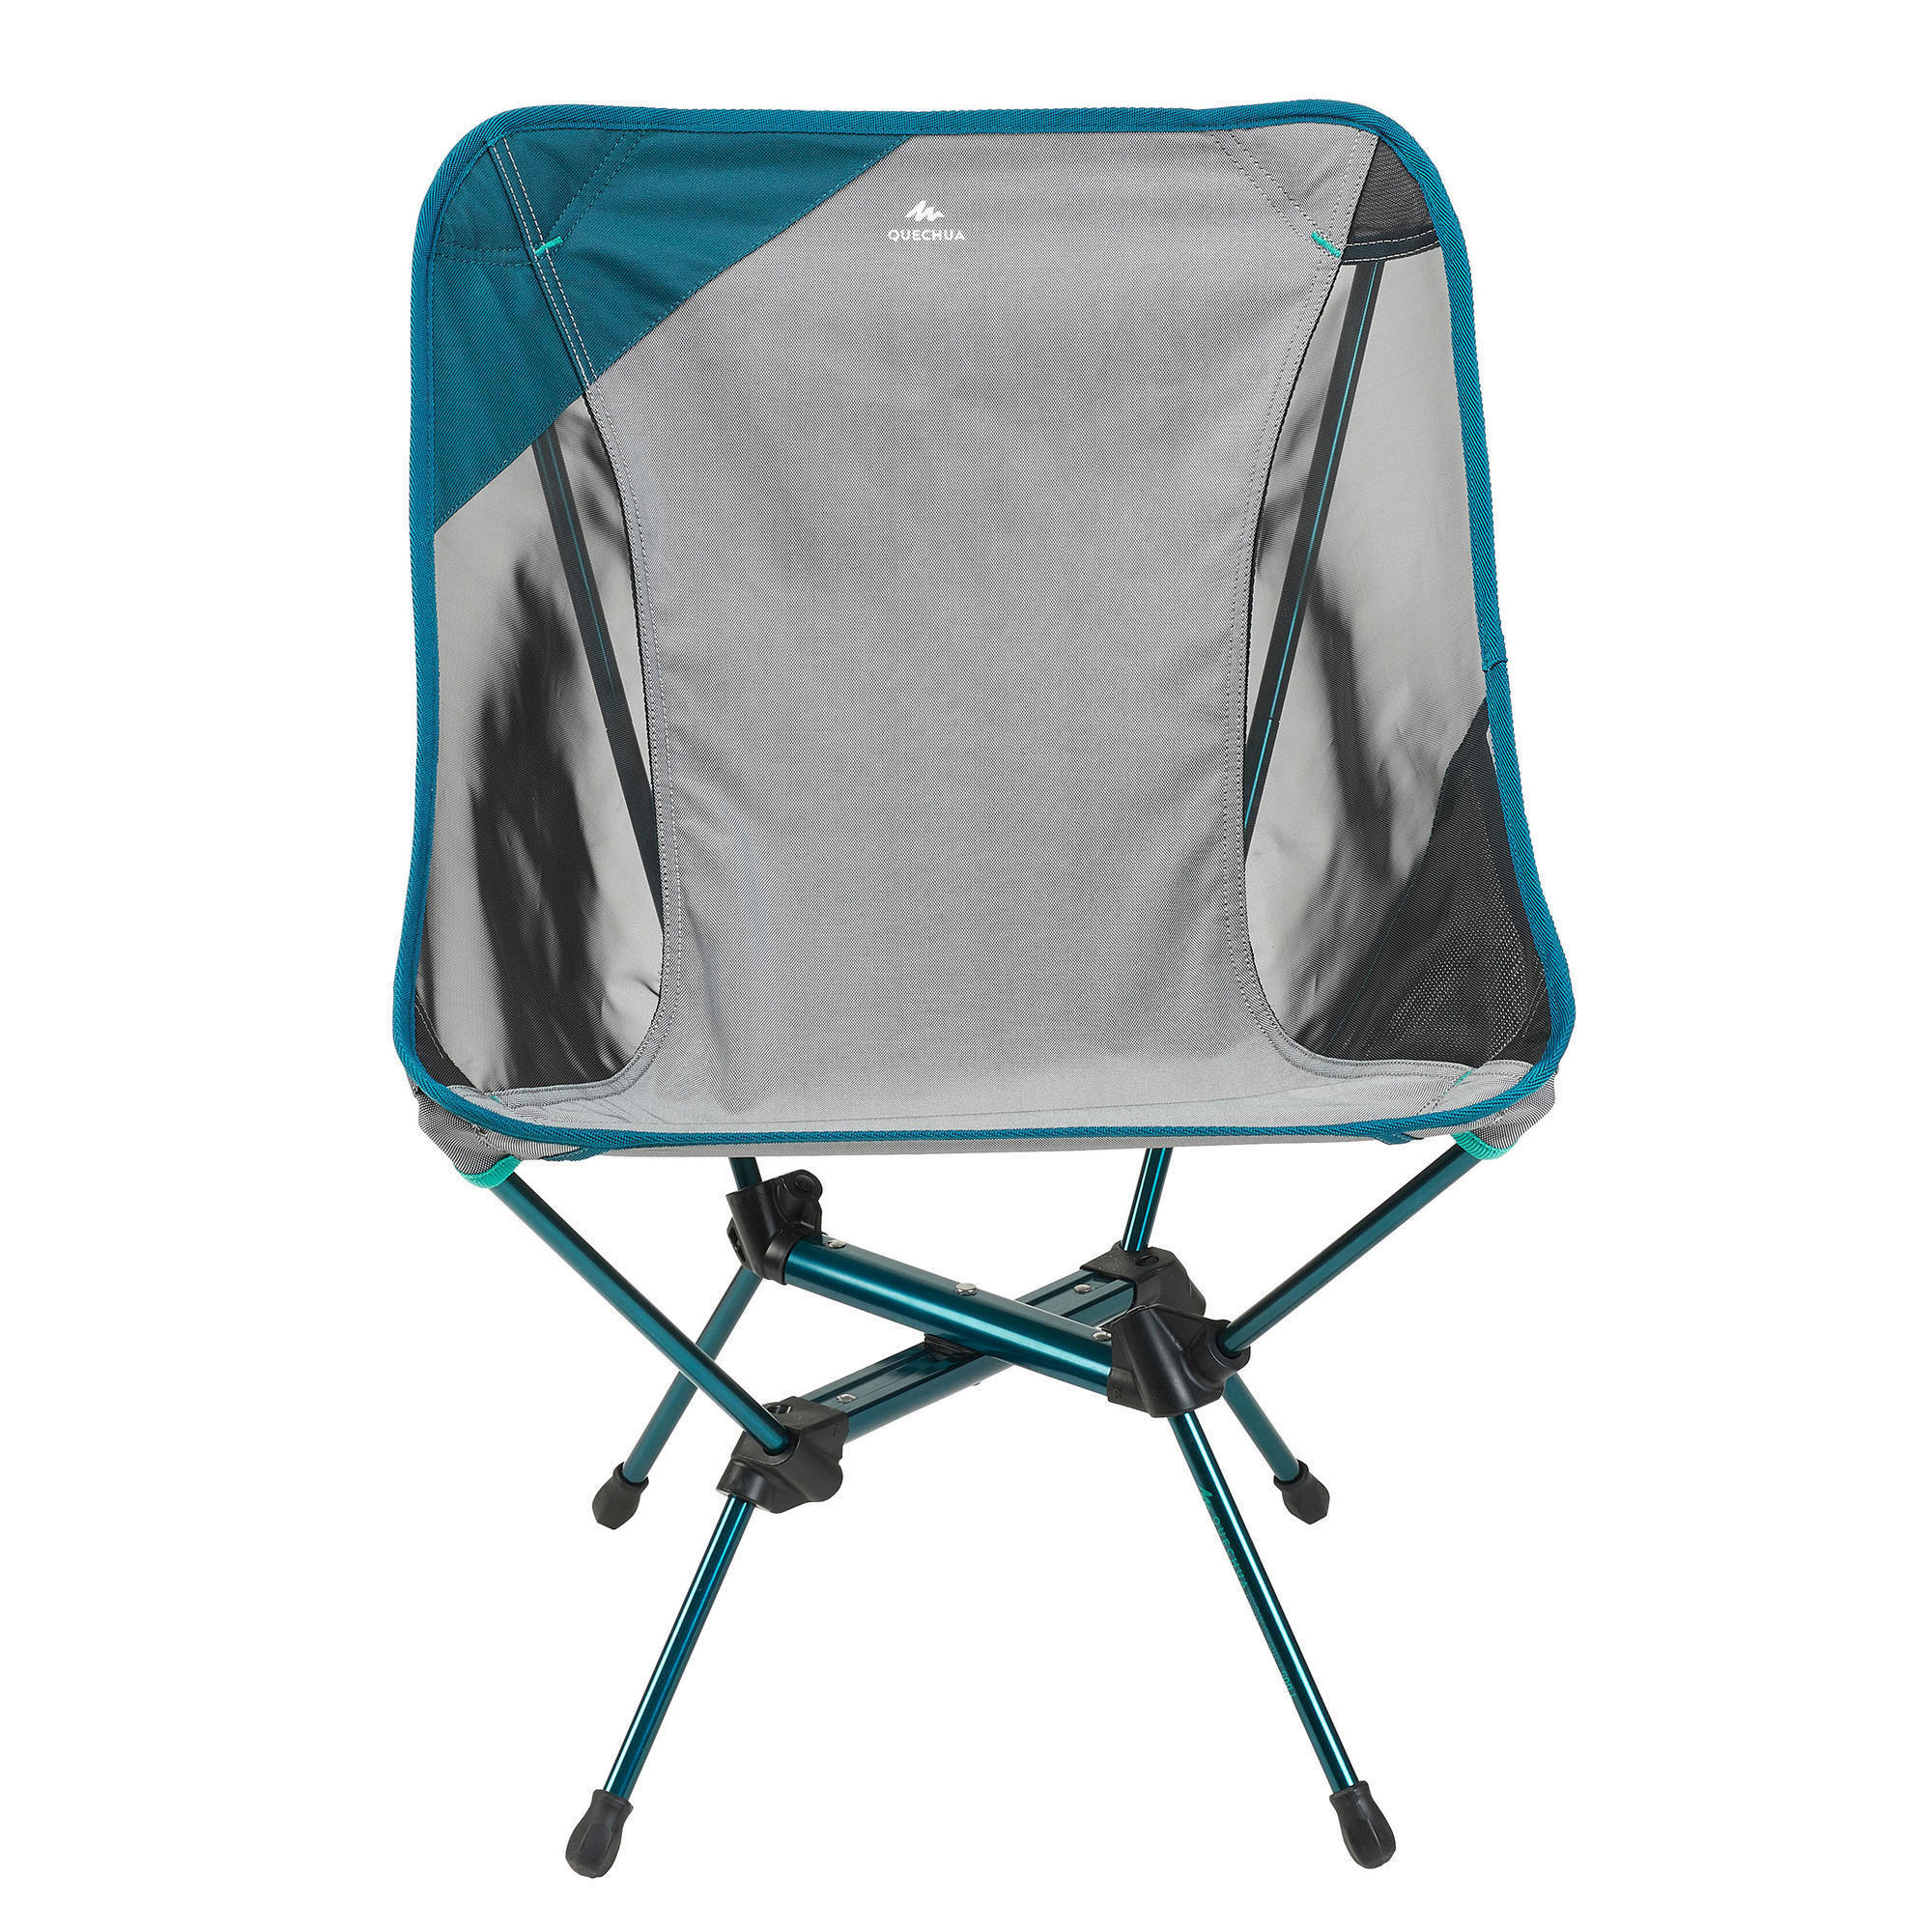 FOLDING CAMPING CHAIR MH500 - GREY 8/16